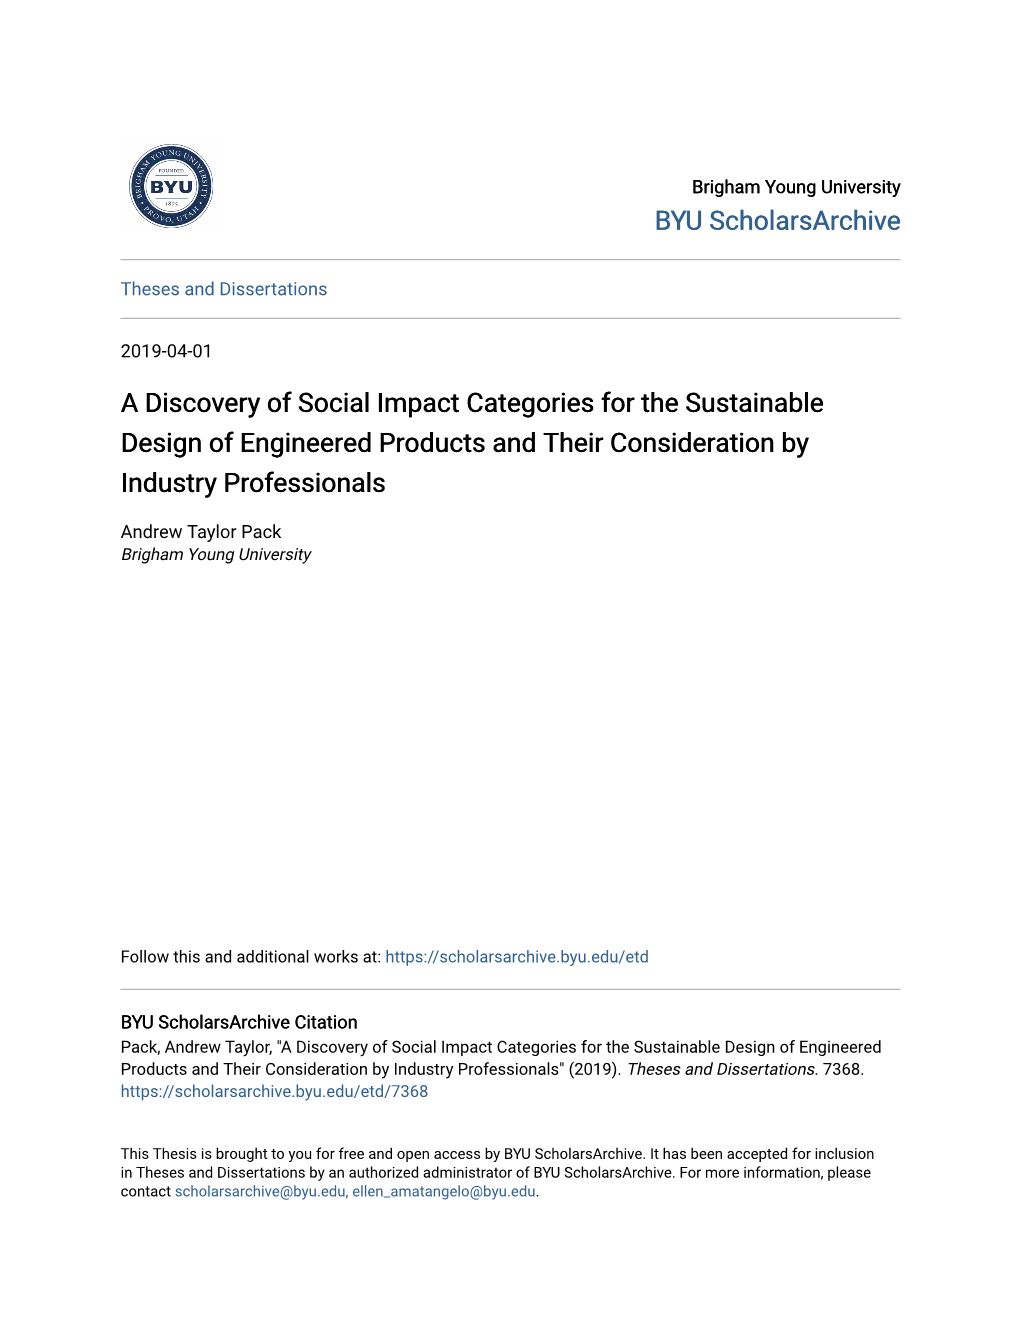 A Discovery of Social Impact Categories for the Sustainable Design of Engineered Products and Their Consideration by Industry Professionals